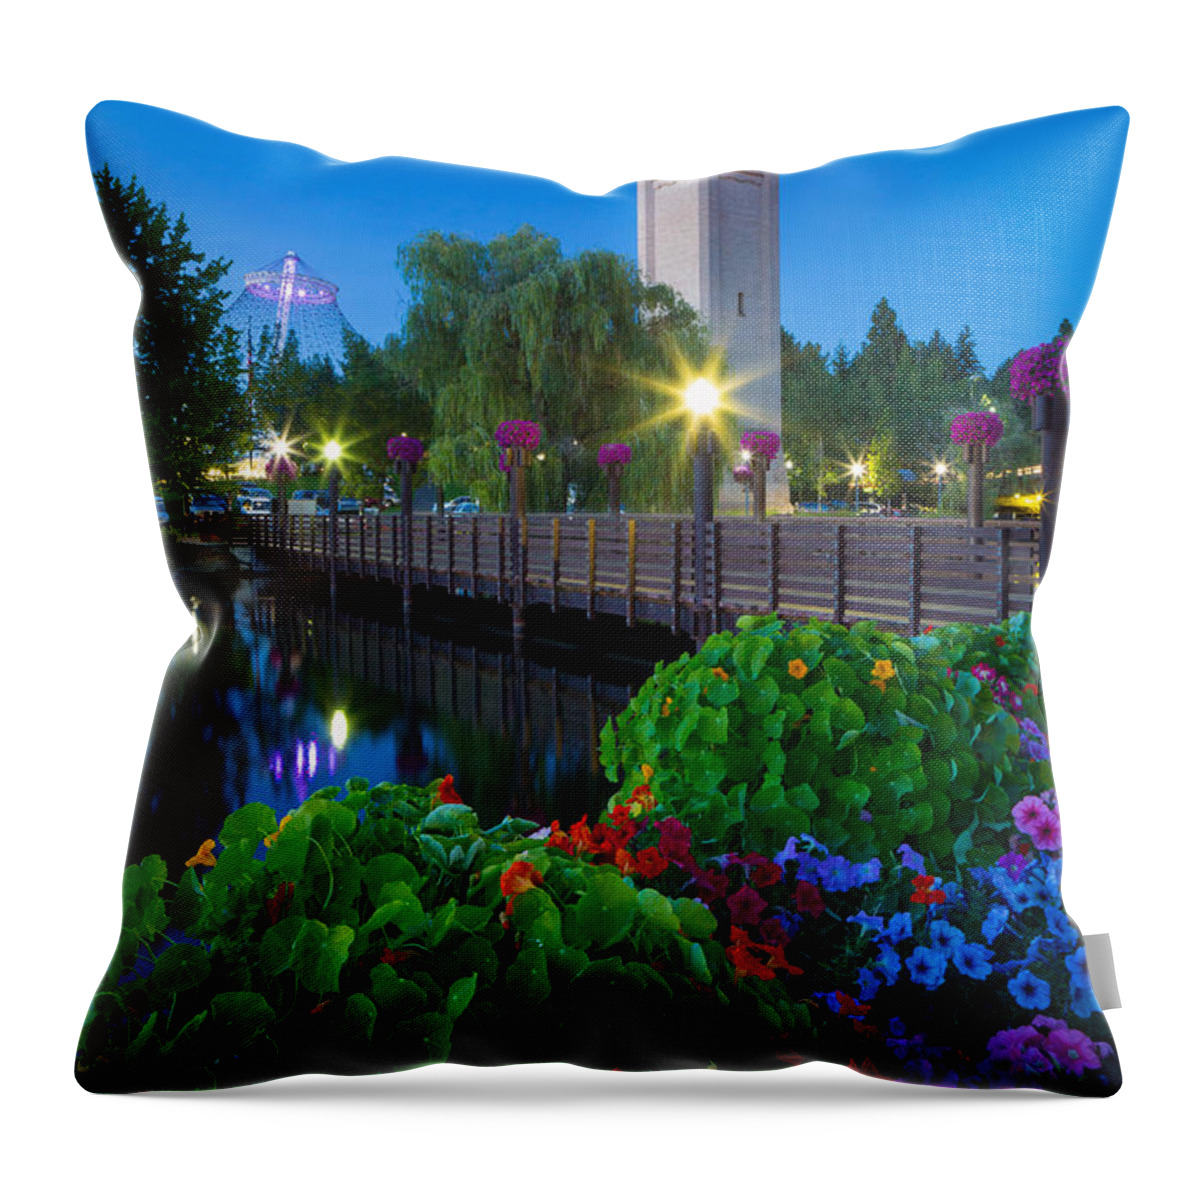 America Throw Pillow featuring the photograph Spokane Clocktower by Night by Inge Johnsson